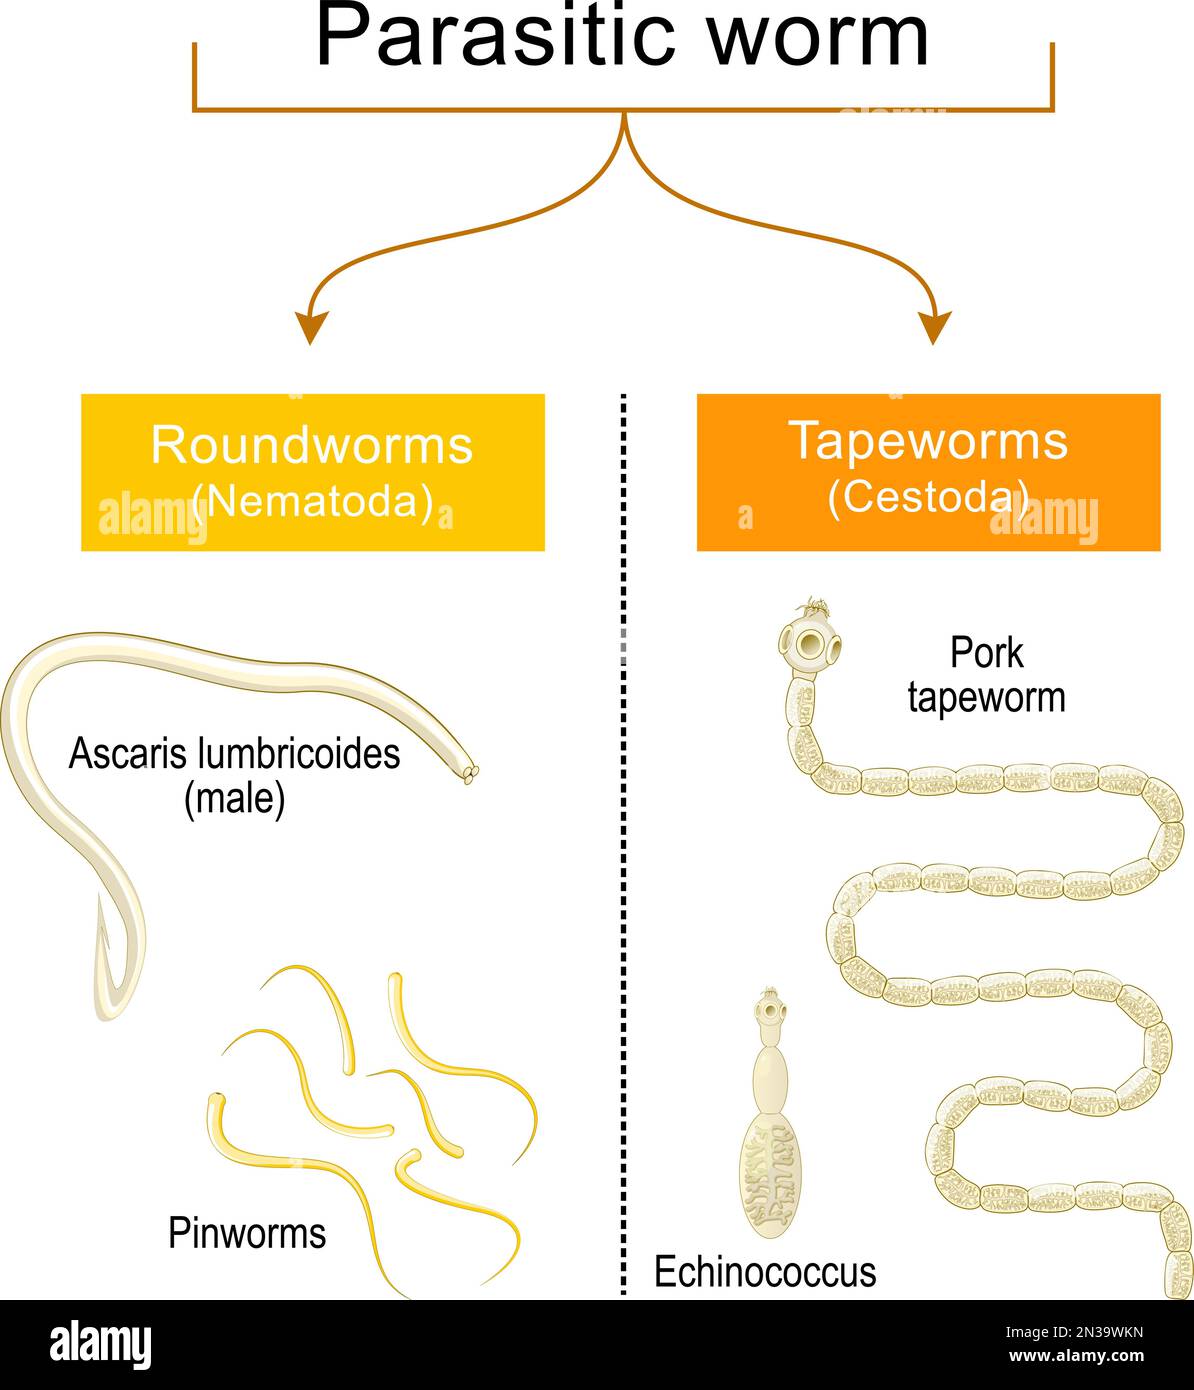 worm infection. Helminthiasis. Common types of parasitic worms or helminths: tapeworms, and roundworms that infected of human gastrointestinal tract. Stock Vector